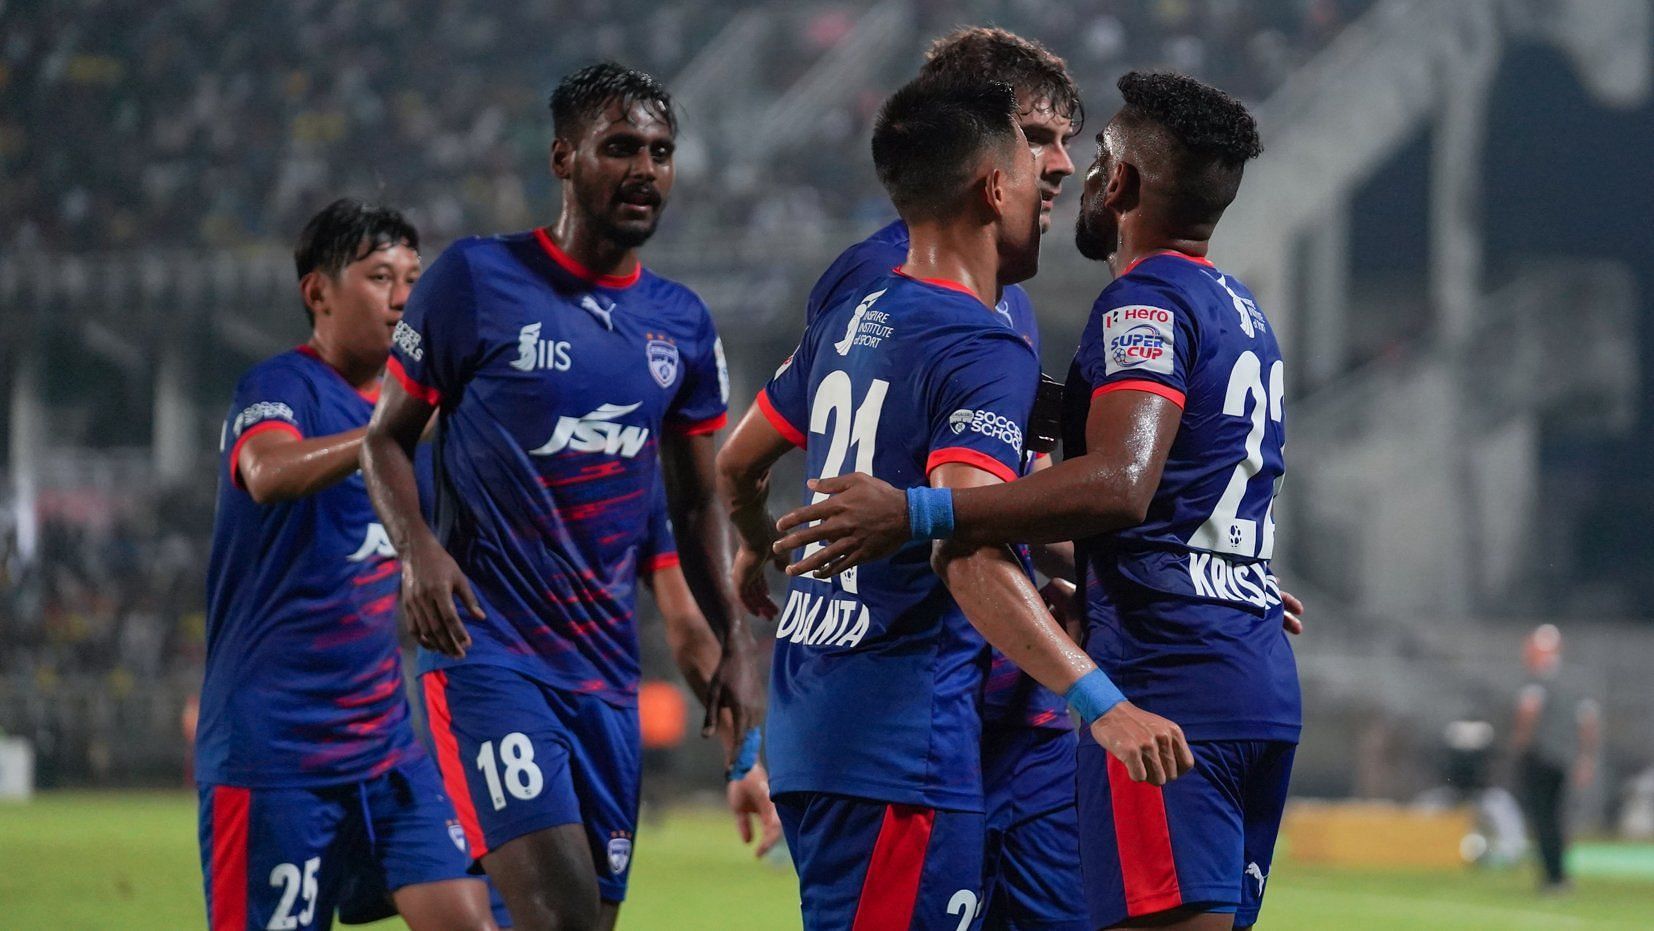 Bengaluru FC will be eager to qualify for their third straight final this season.